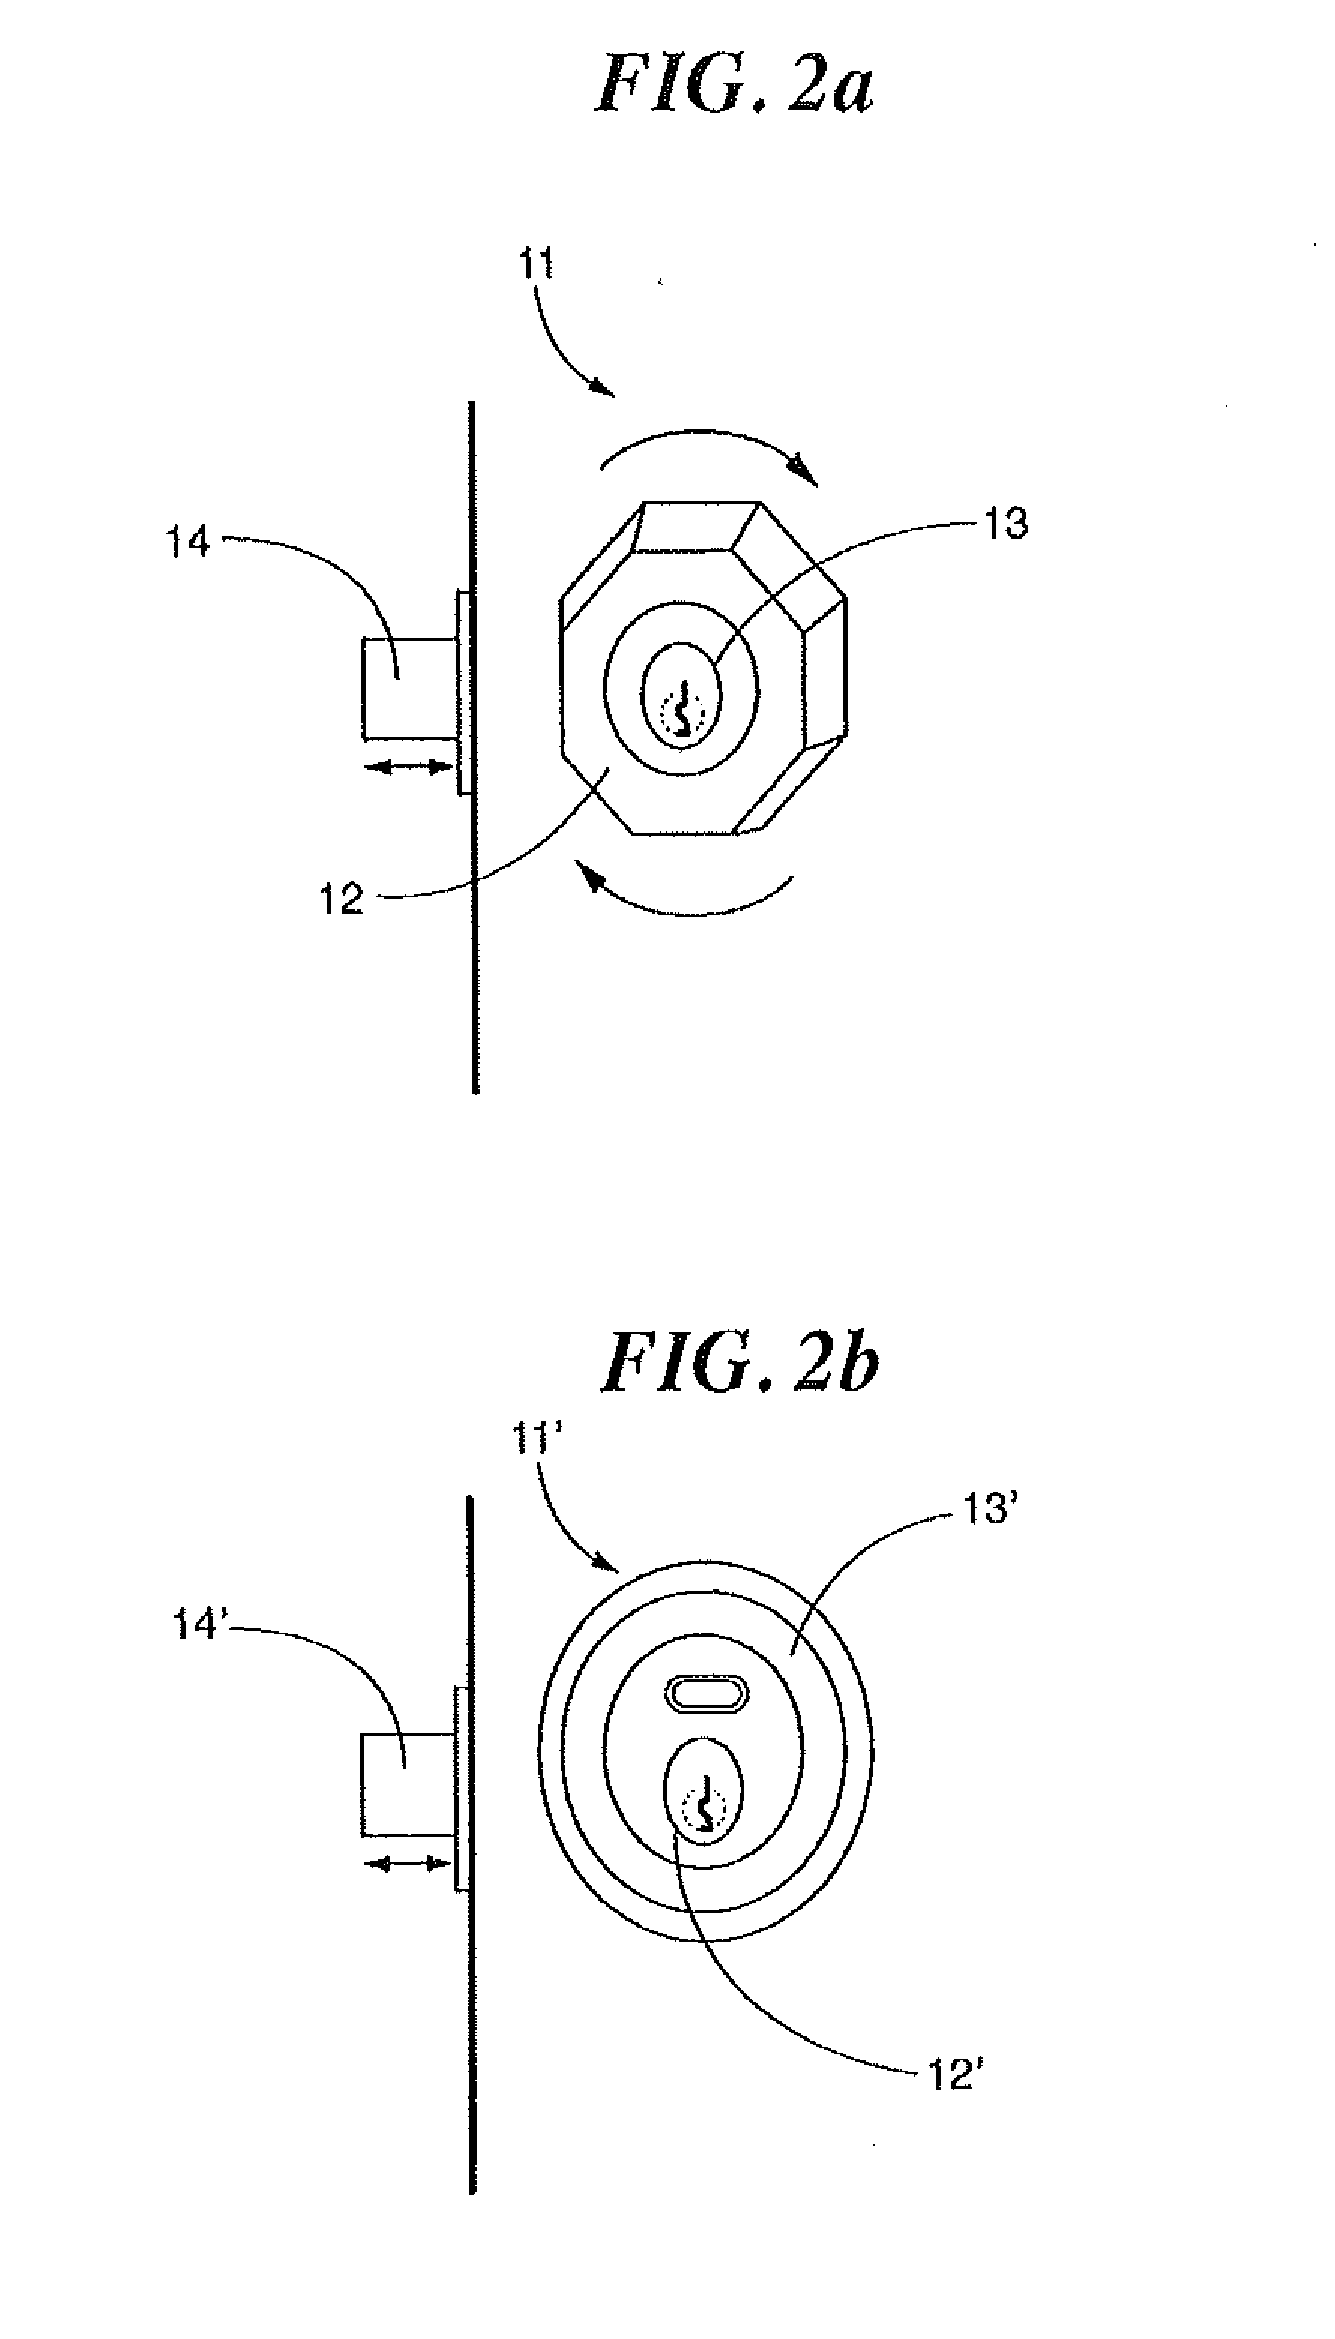 Wireless access control system and related methods